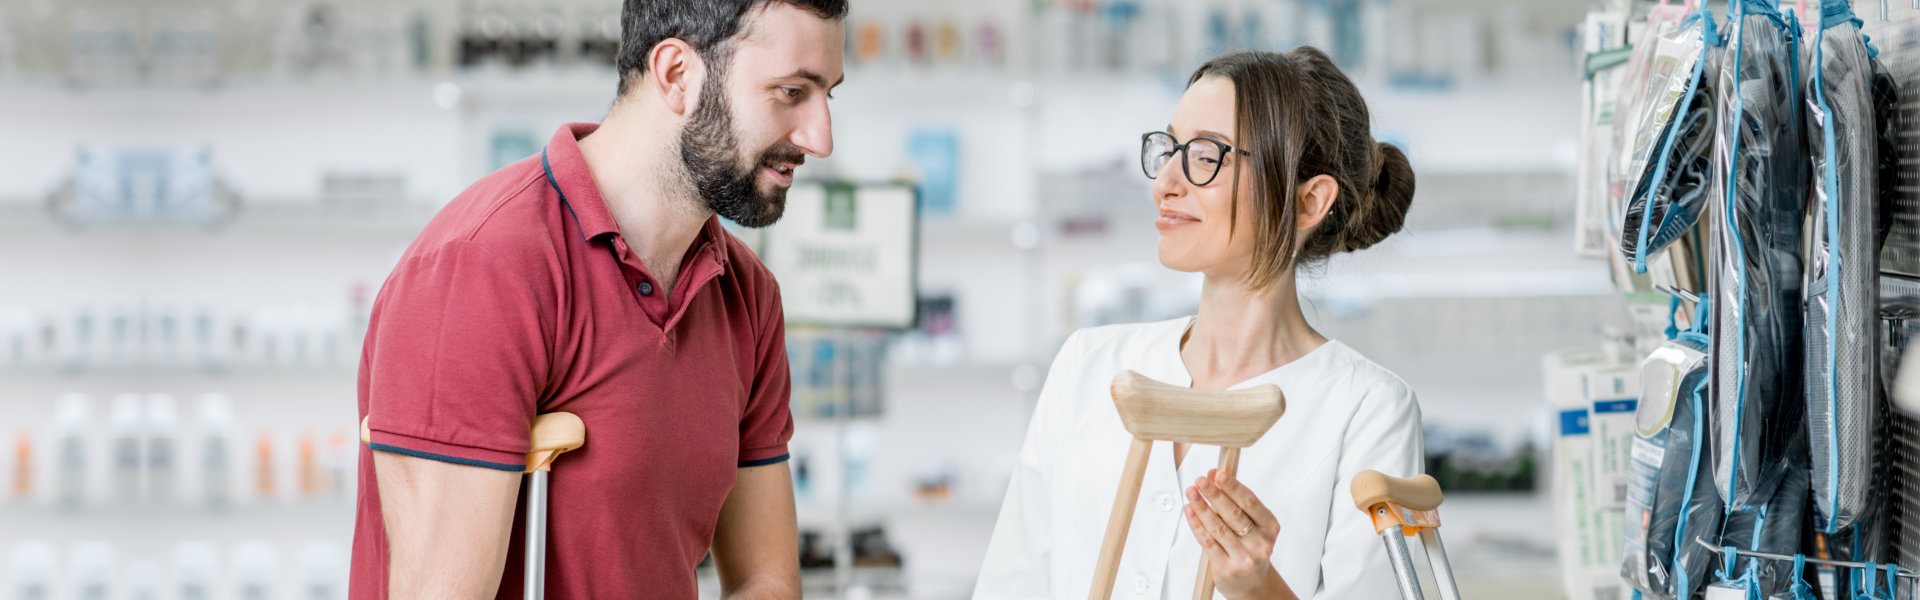 woman pharmacist helping to choose crutches for the man